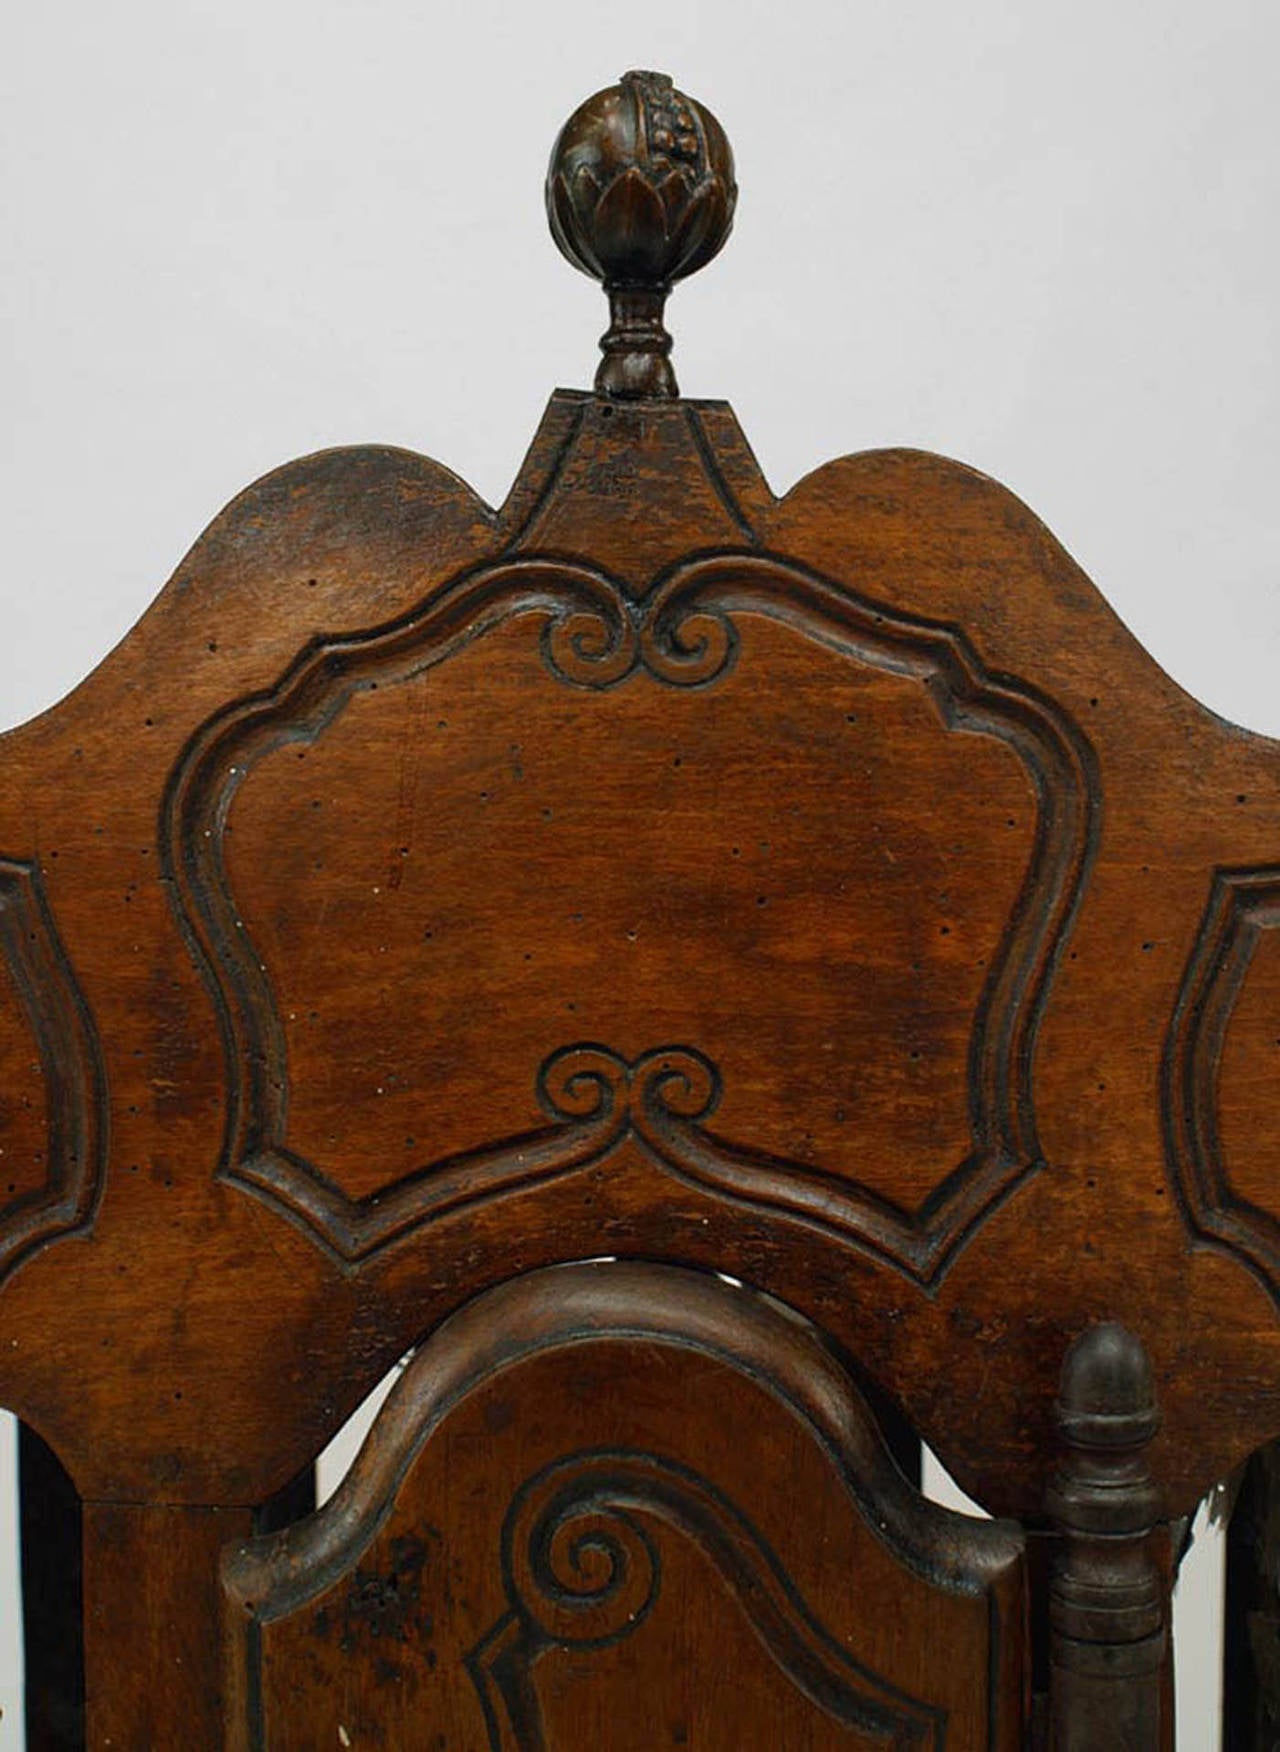 French Provincial (18th Century) walnut spindle design bread box.
